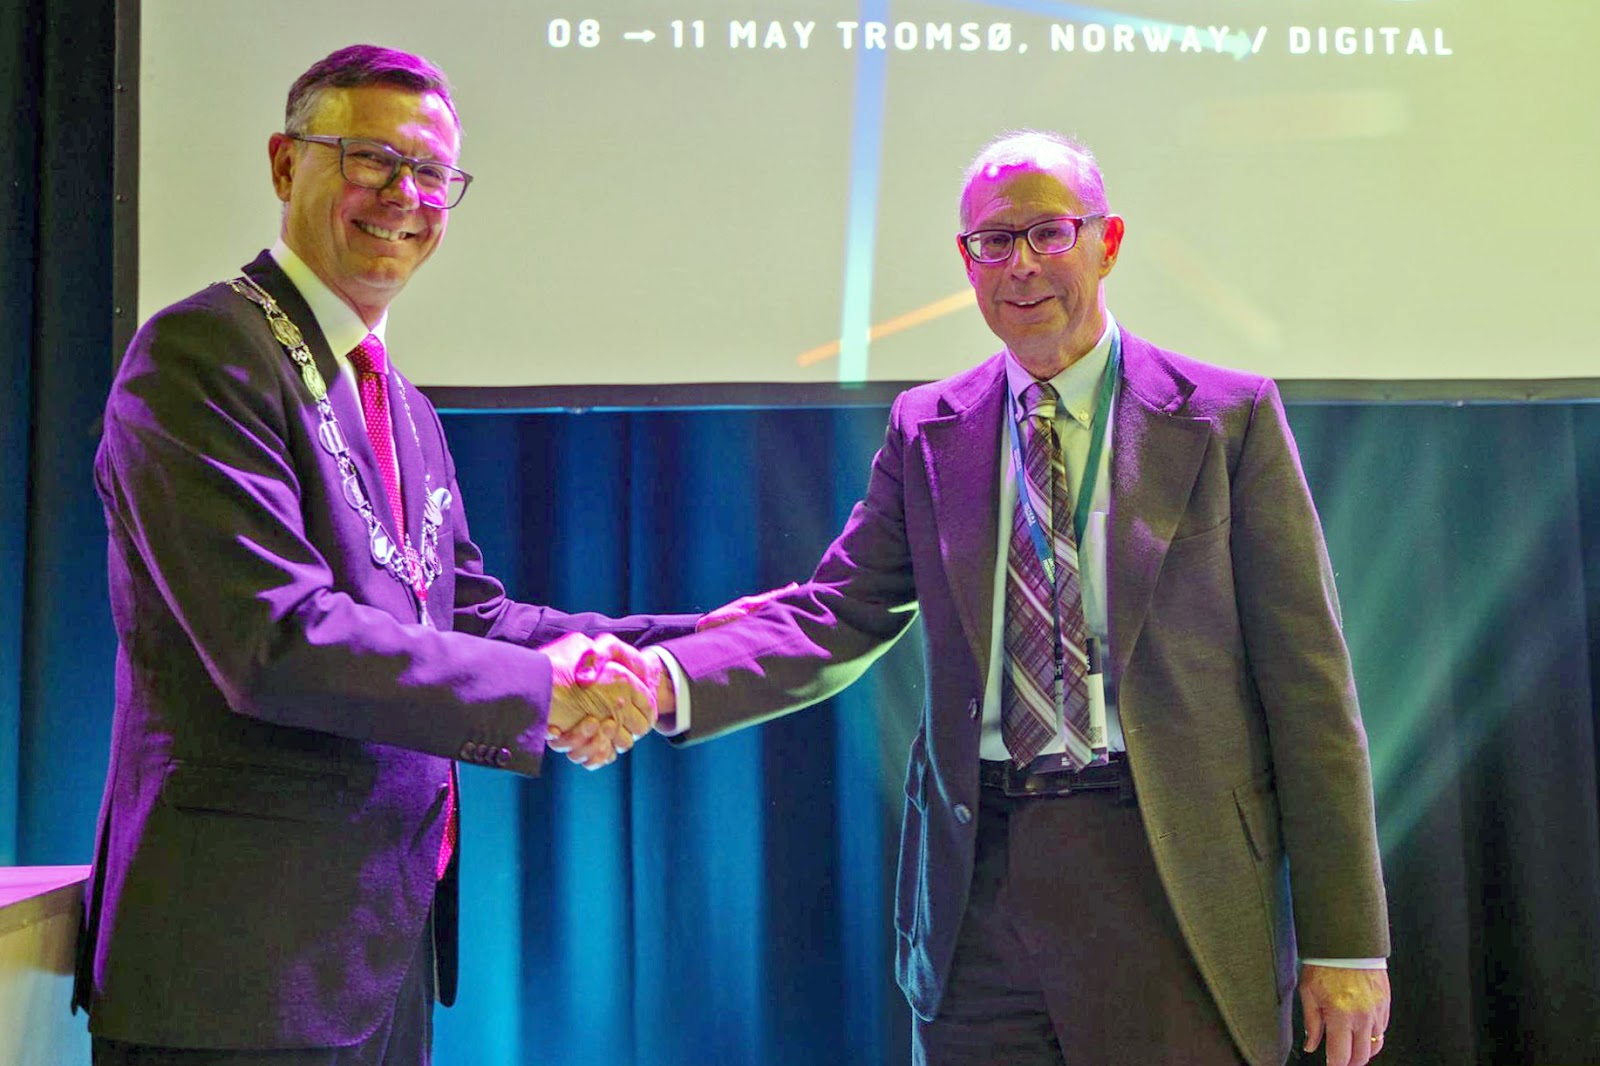 John Walsh, right, receives the 2022 Mohn Prize at the Arctic Frontiers Conference in Tromsø, Norway, from Dag R. Olsen, Director of the University of Tromsø — The Arctic University of Norway. Photo University of Tromsø.